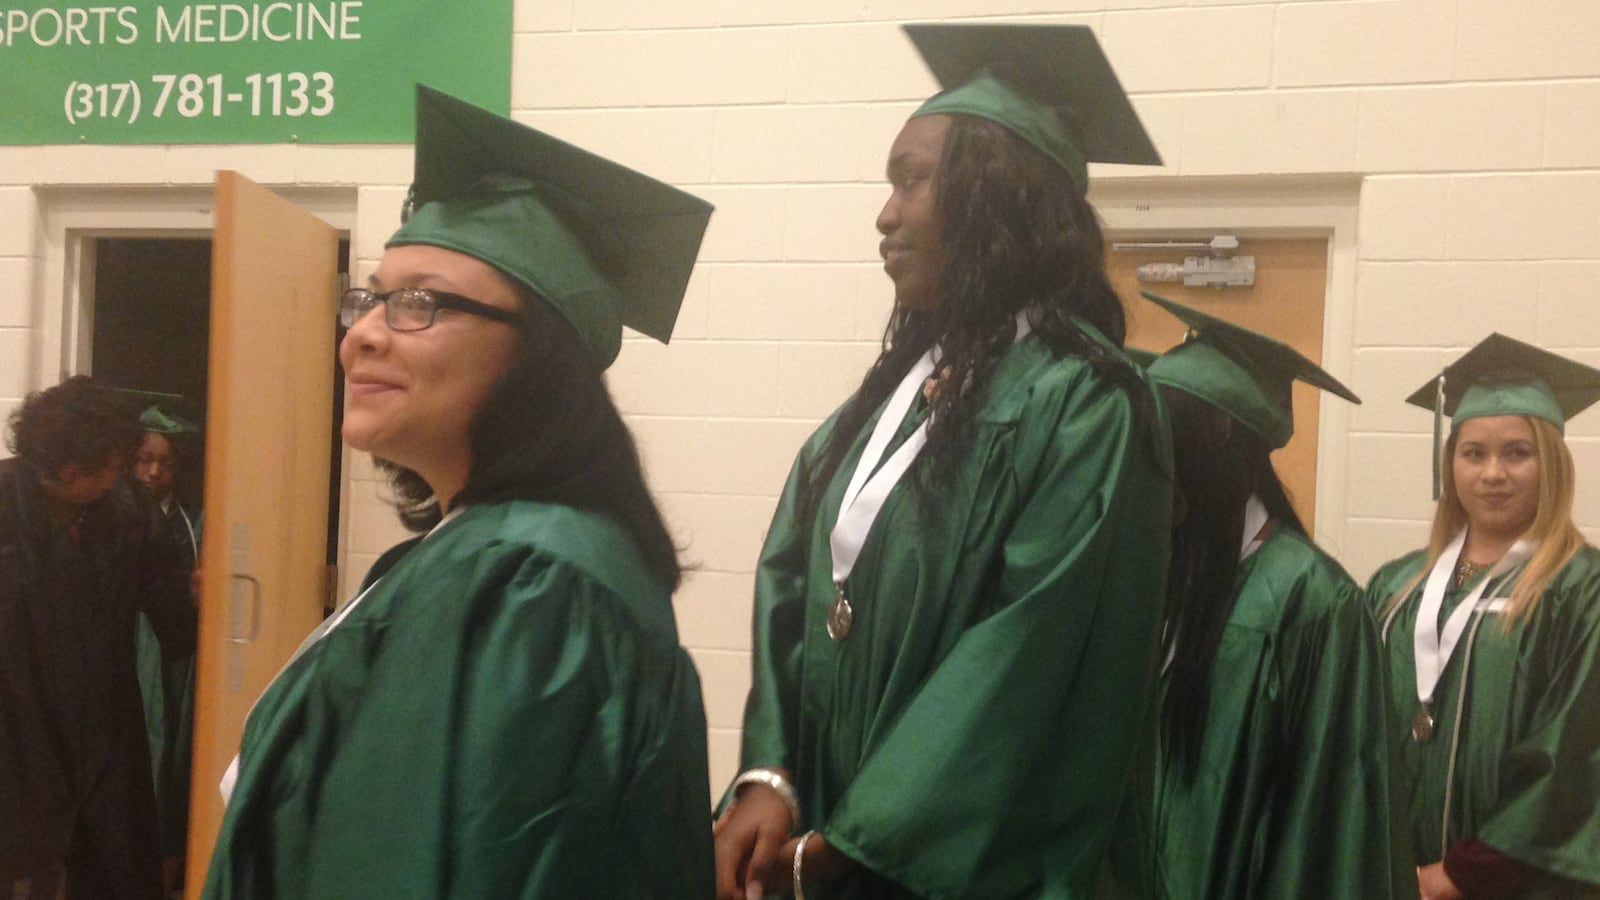 Nearly 200 students graduated from Excel Centers, a growing network of dropout recovery charters.